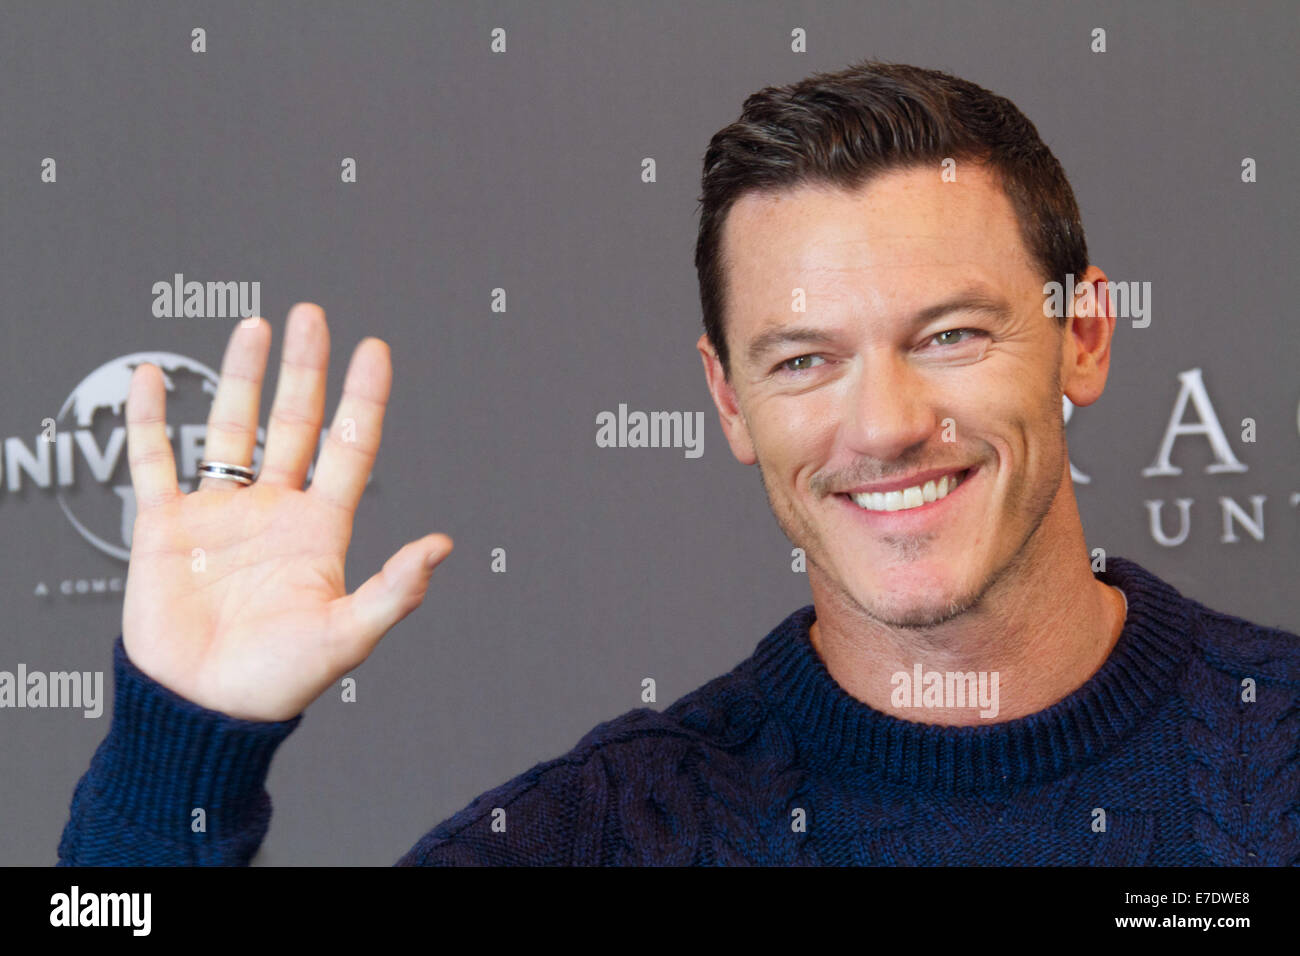 Berlin, Germany. 15th Sep, 2014. British actor Luke Evans poses at a photocall for the movie 'Dracula Untold' in Berlin, Germany, 15 September 2014. The movie comes to the theaters on 02 October 2014. PHOTO: Lisa Ducret/dpa/Alamy Live News Stock Photo